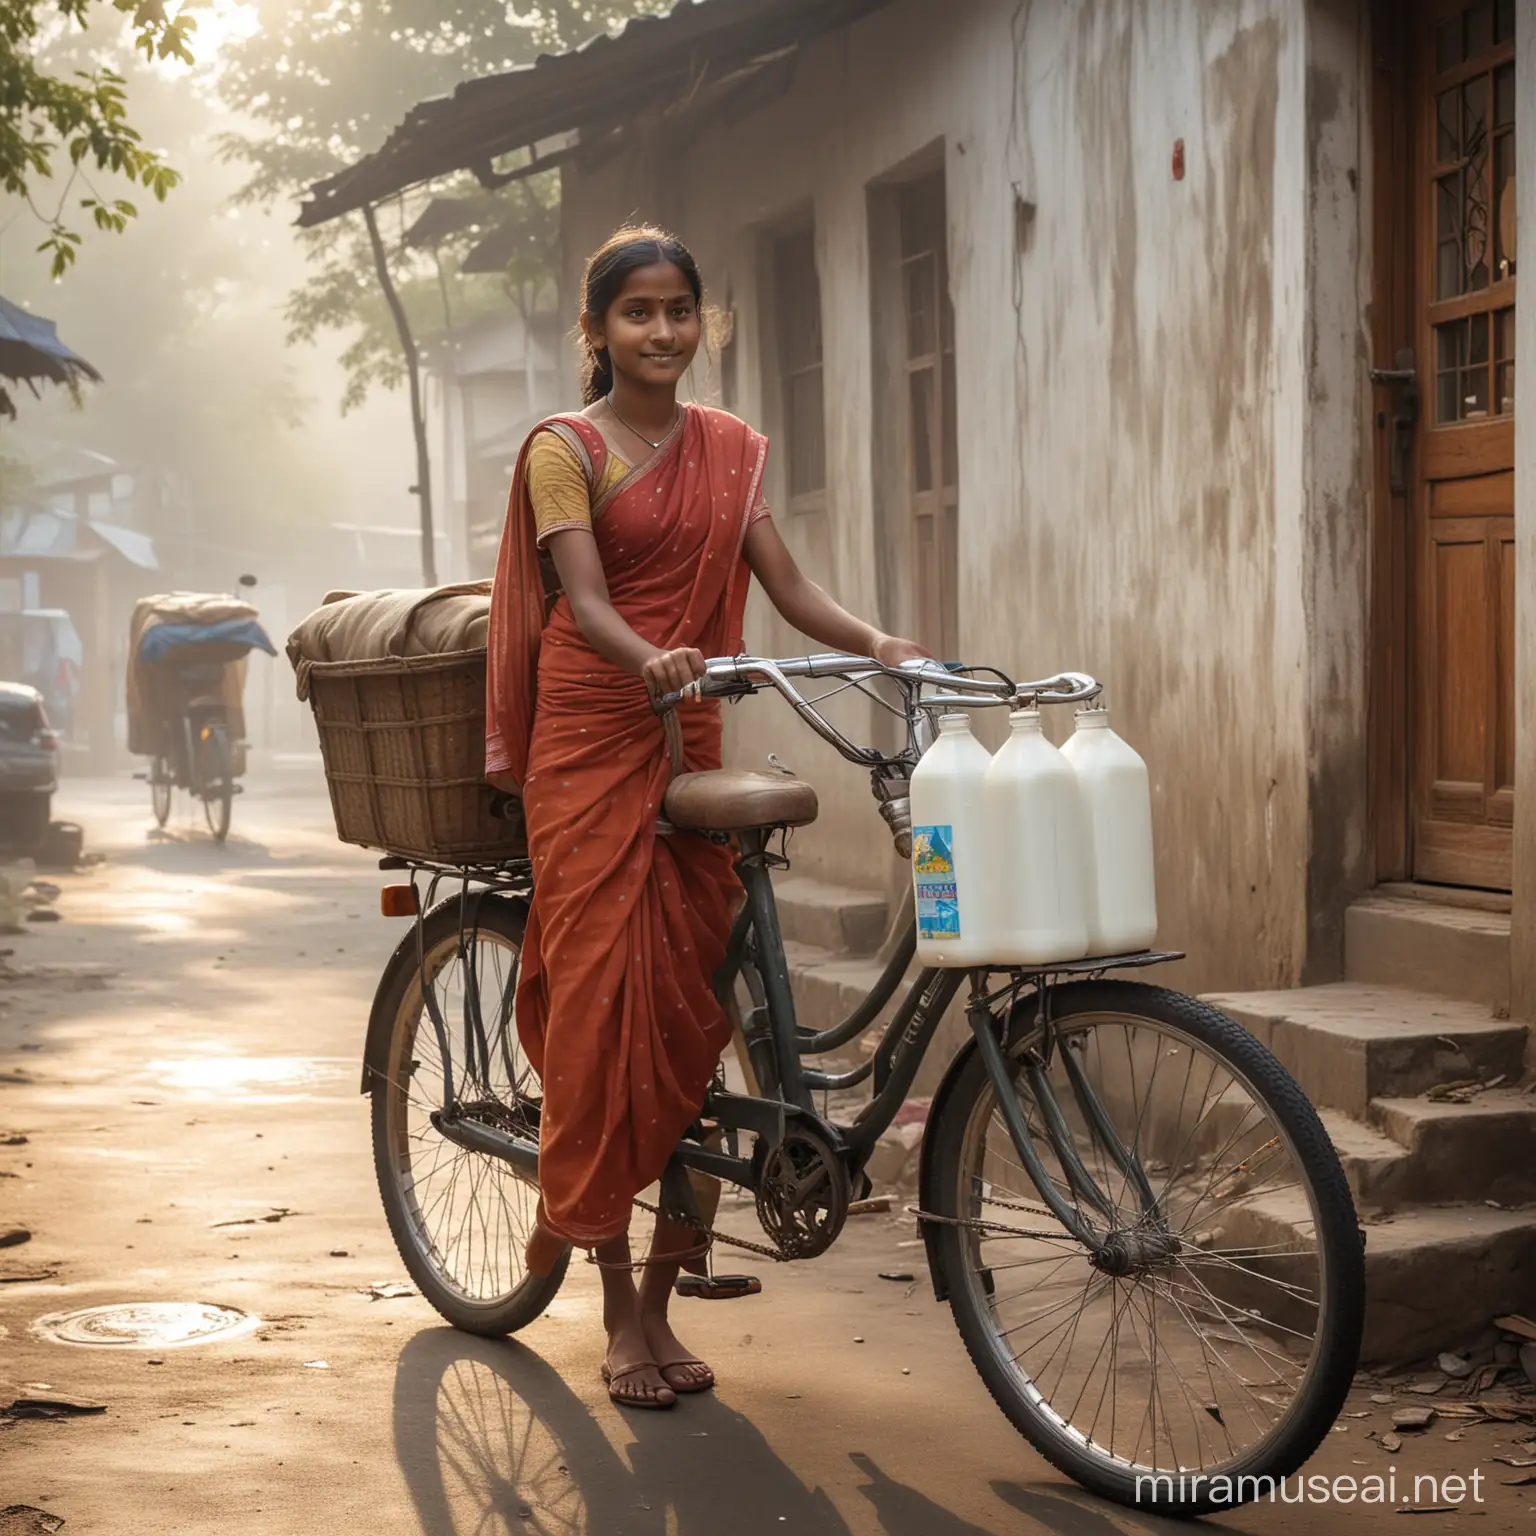 Indian Milk Delivery Morning Scene with Man and Girl